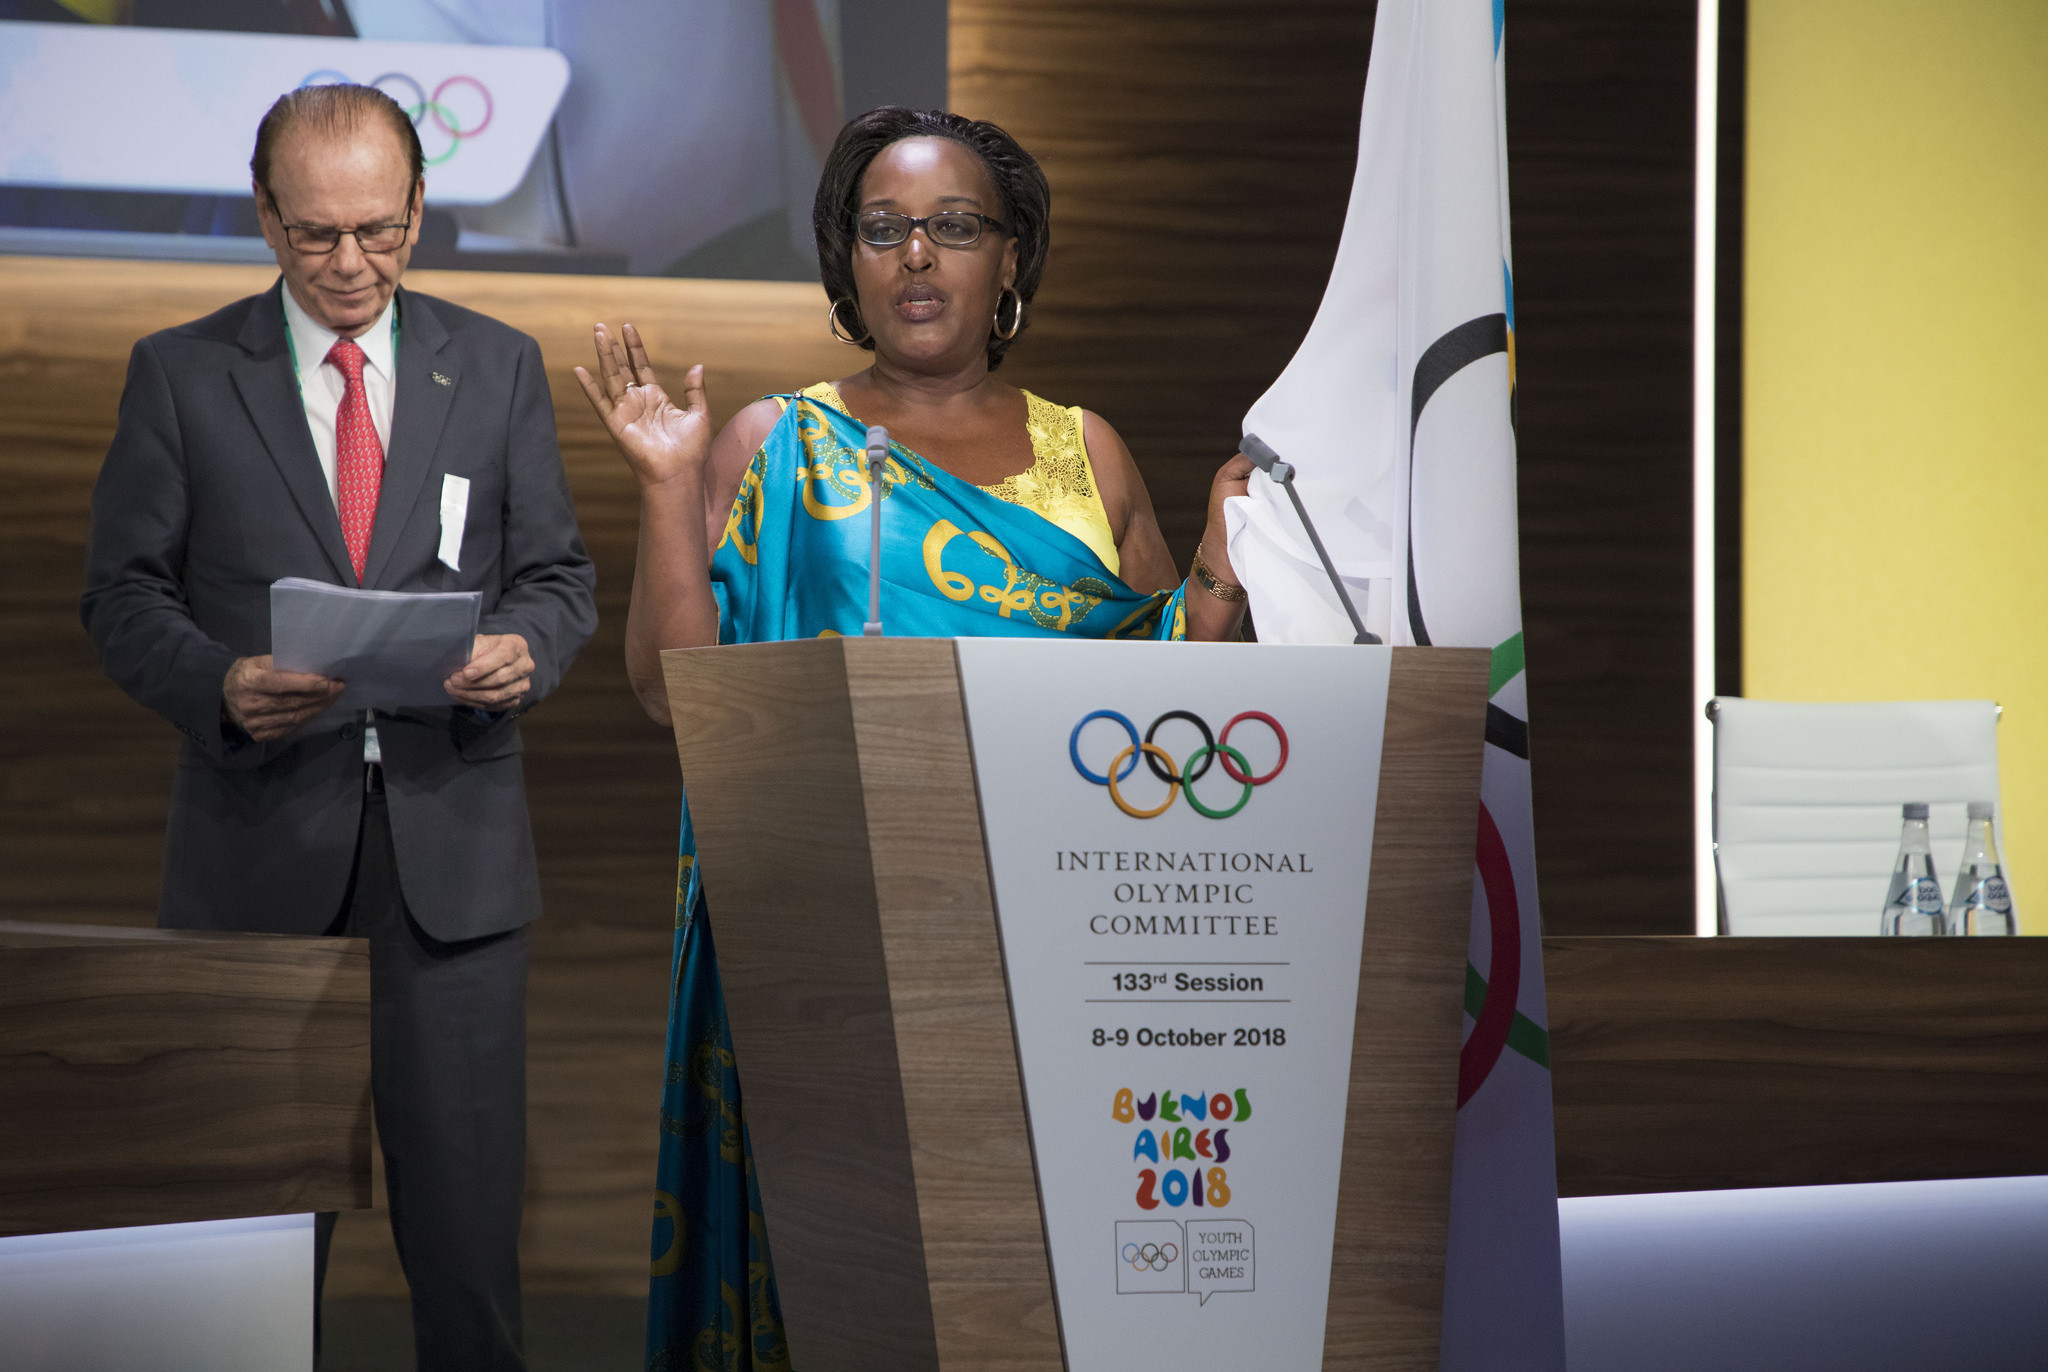 Félicité Rwemarika was sworn in as an IOC member at the Session in Buenos Aires ©IOC